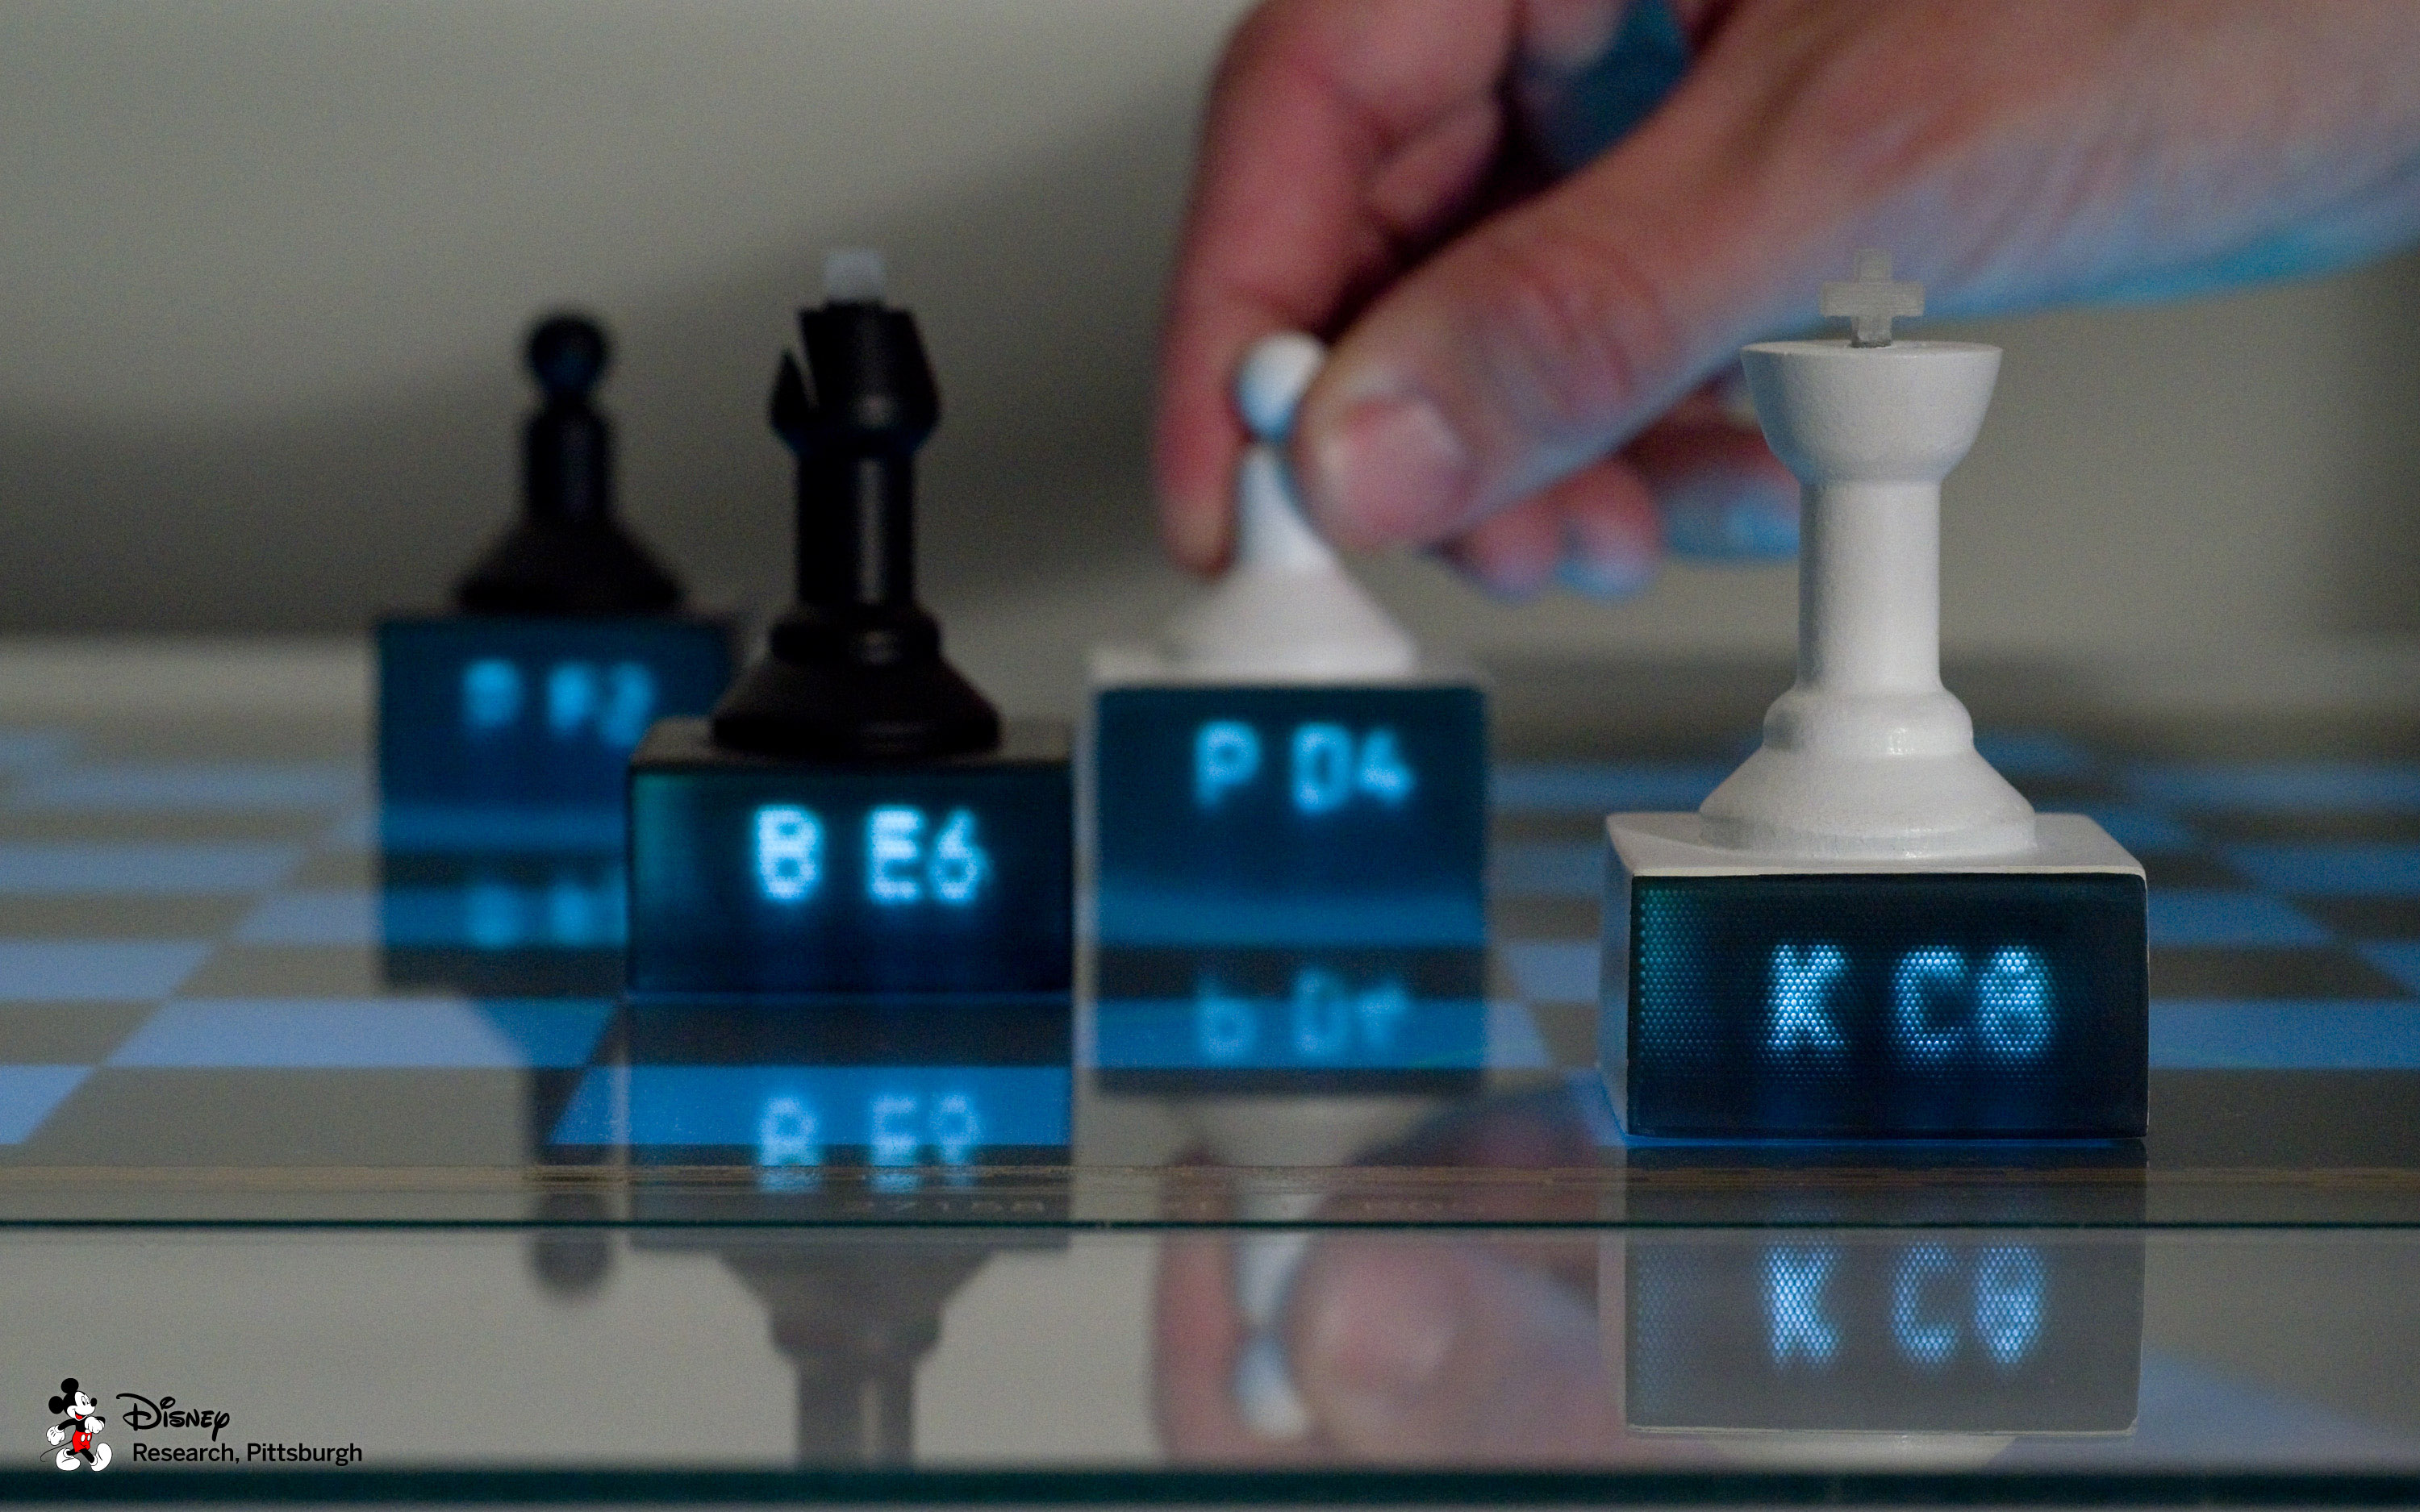 Chess pieces with embedded light pipes display content piped from an interactive tabletop. Contextual information, such as chess piece location and suggested moves, can be displayed on each individual piece.